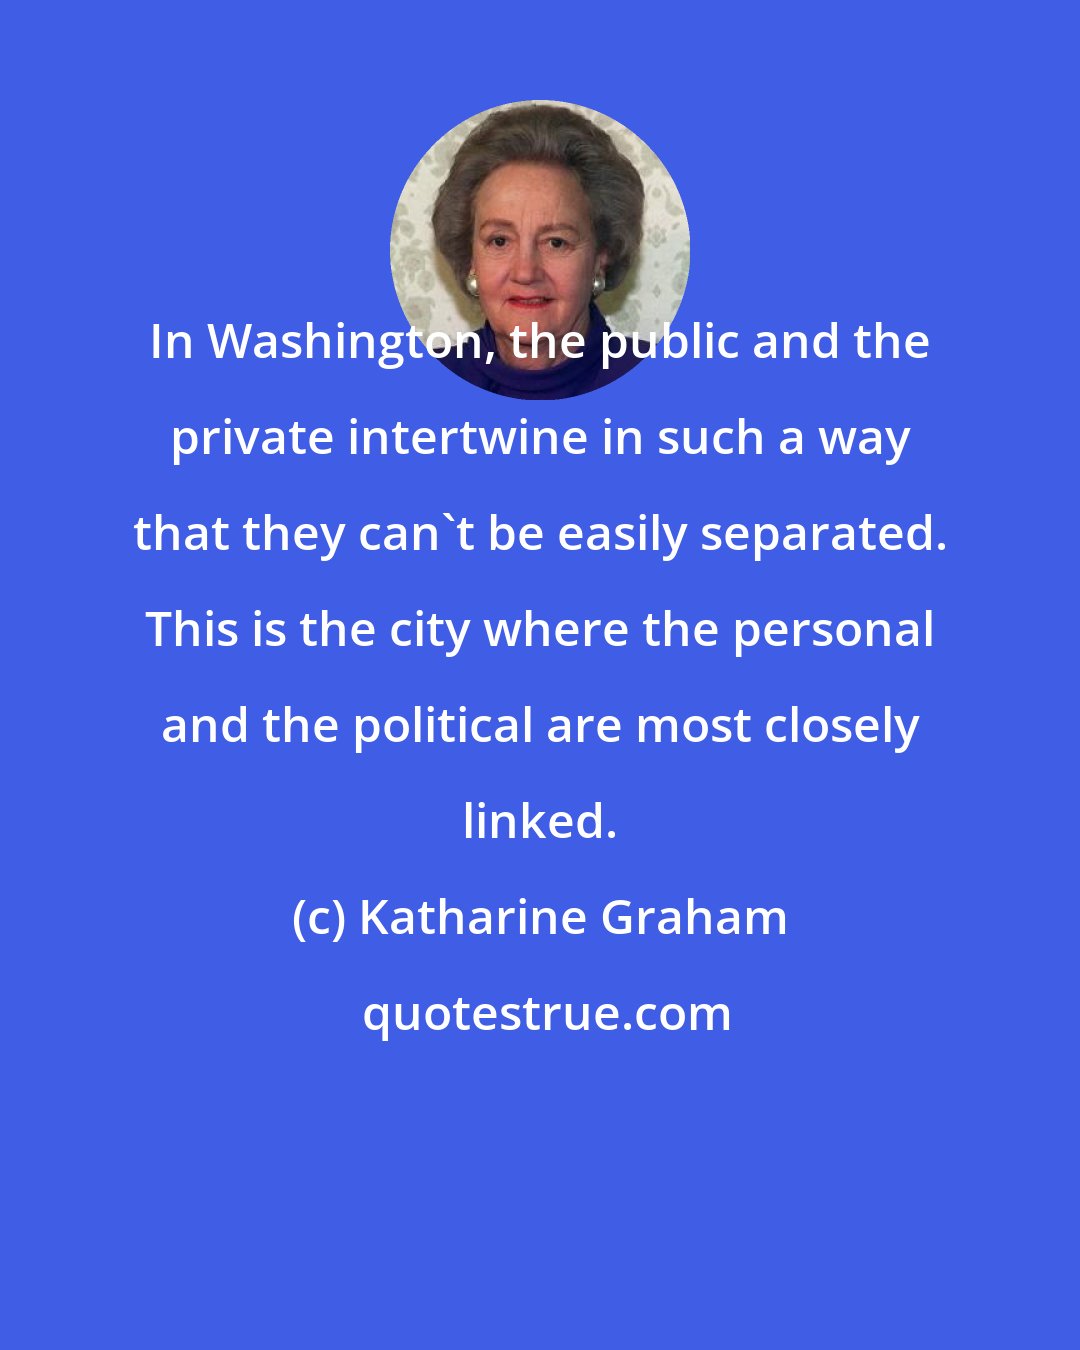 Katharine Graham: In Washington, the public and the private intertwine in such a way that they can't be easily separated. This is the city where the personal and the political are most closely linked.